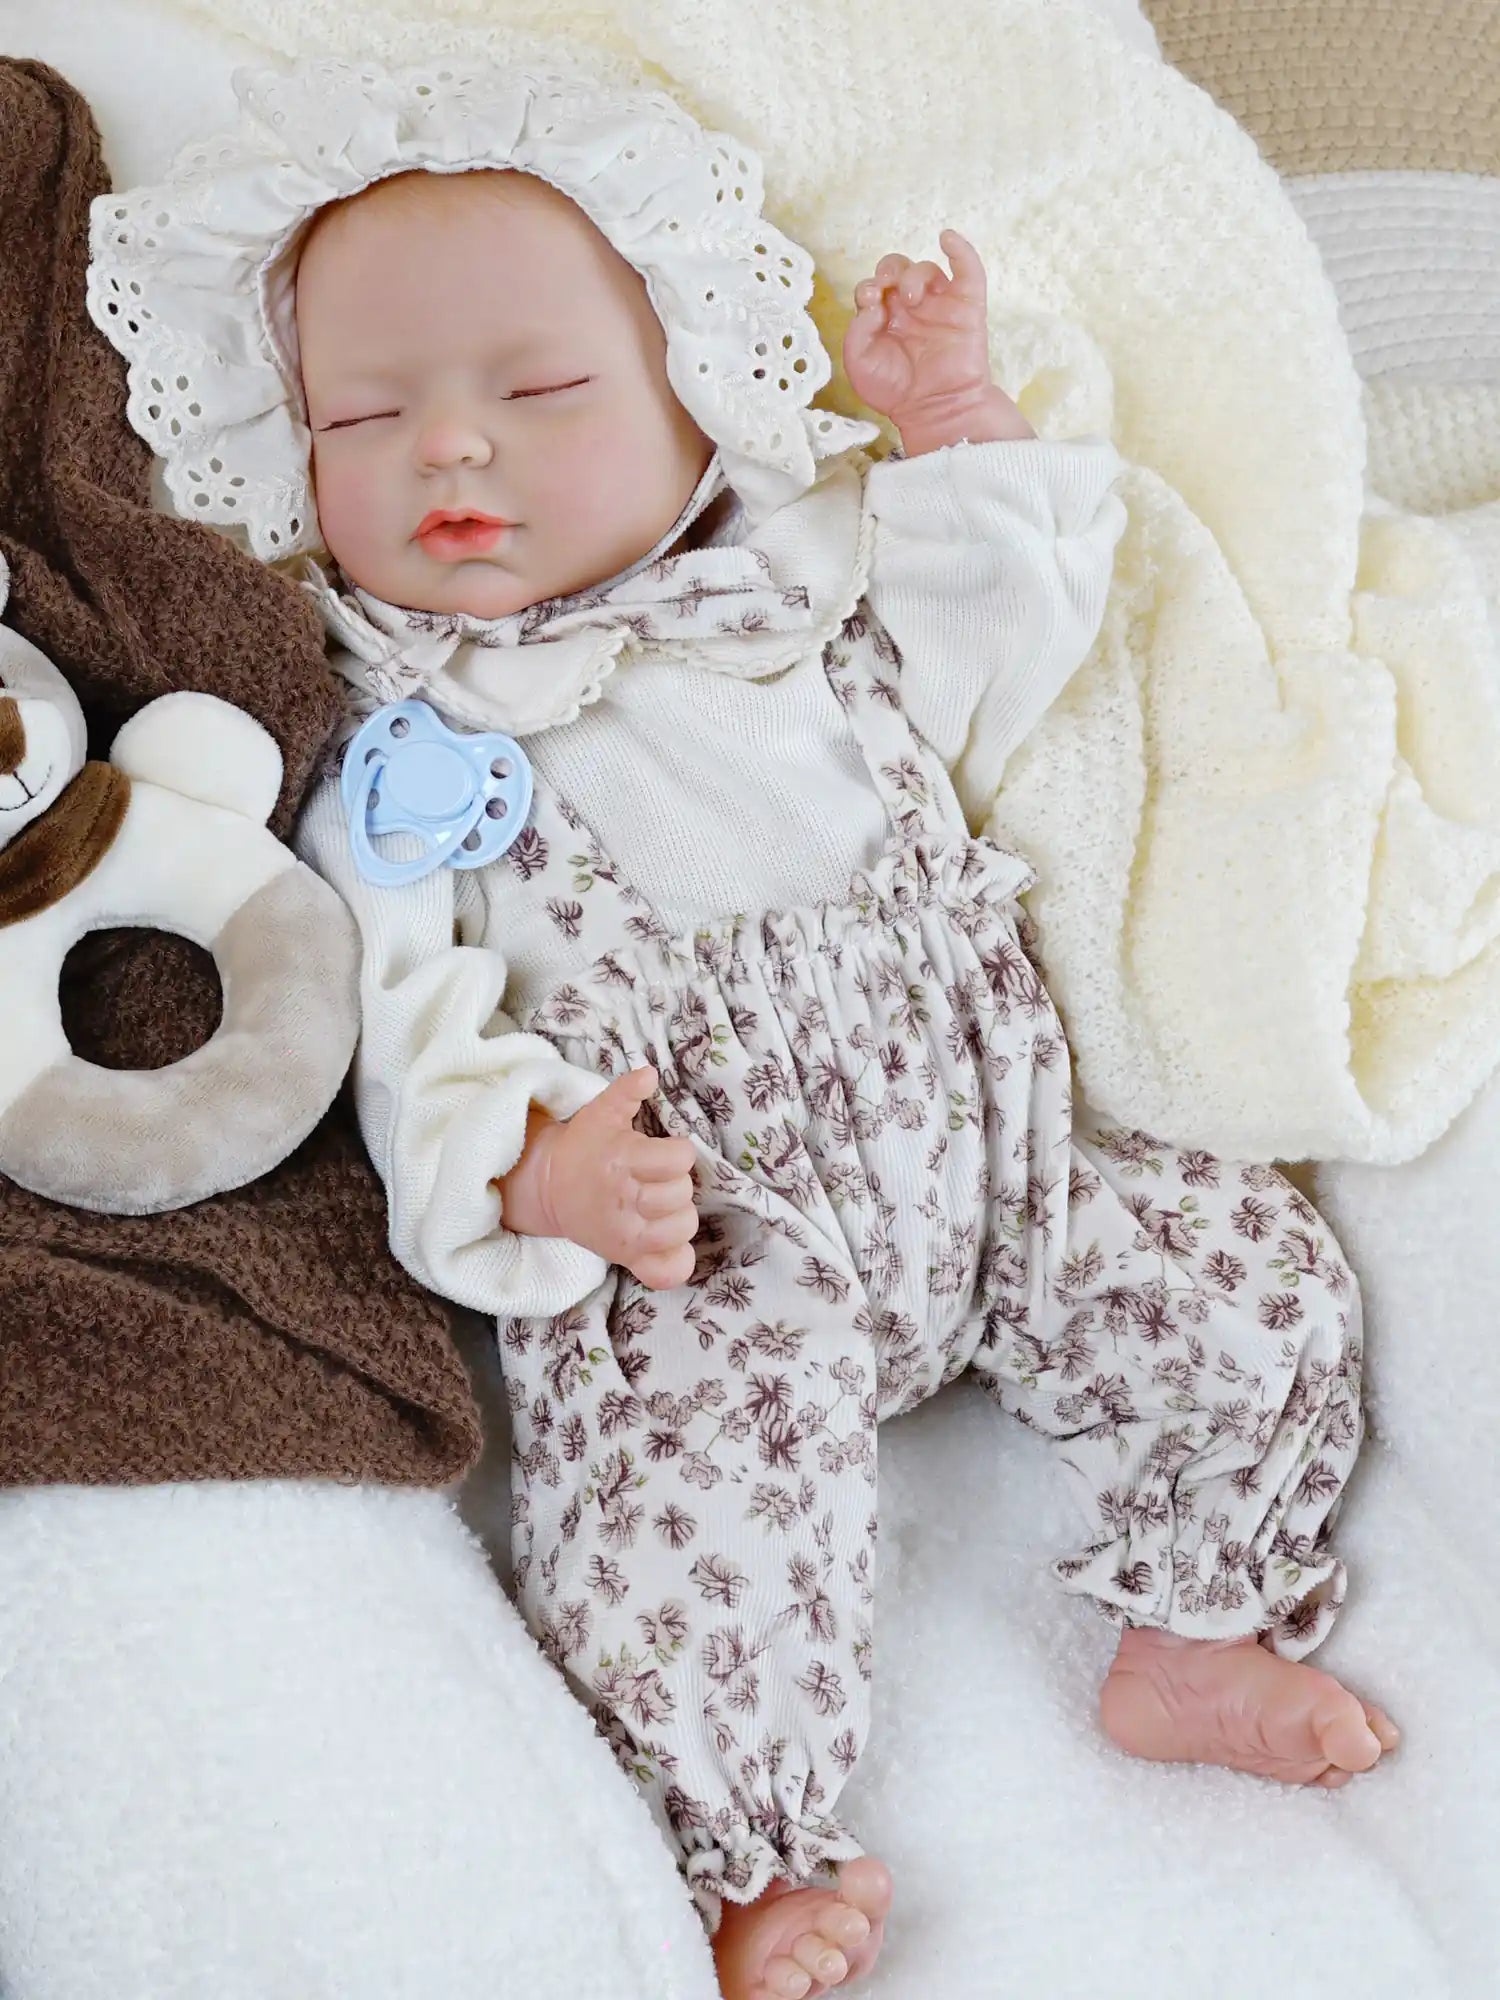 Sleeping reborn baby doll with floral jumpsuit and lace bonnet.